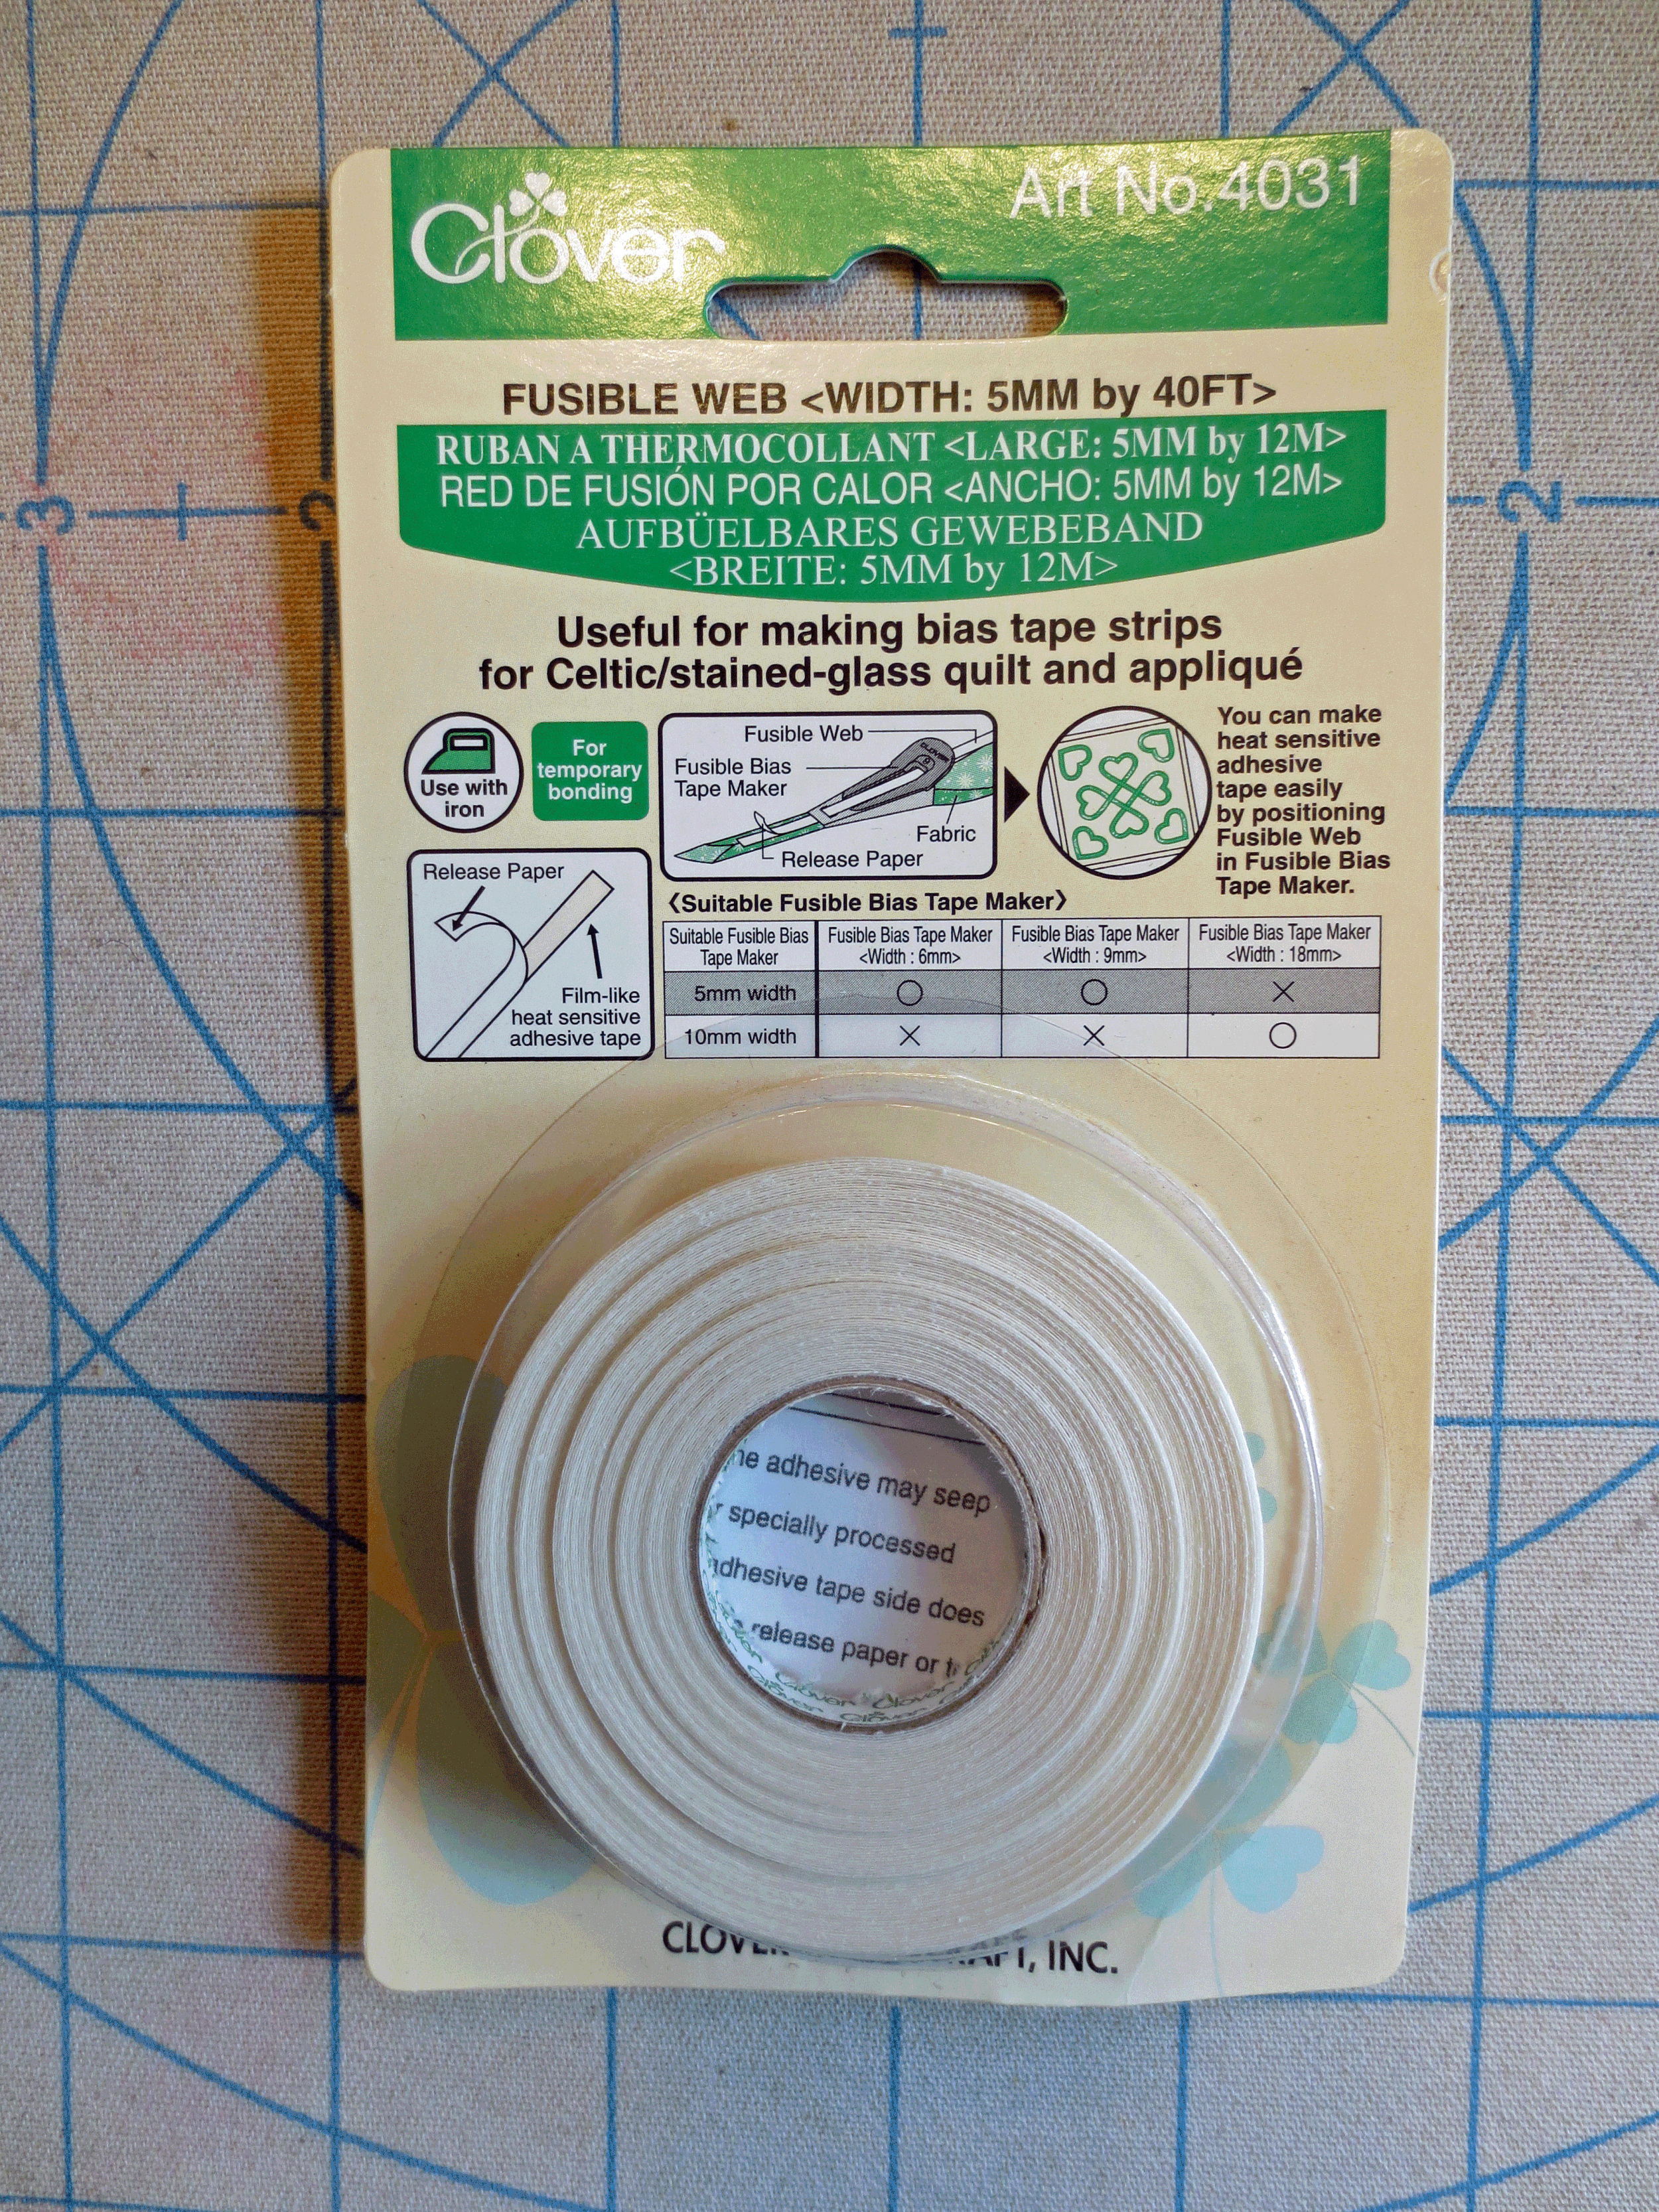 Signs-of-Spring-fusible-tape.gif